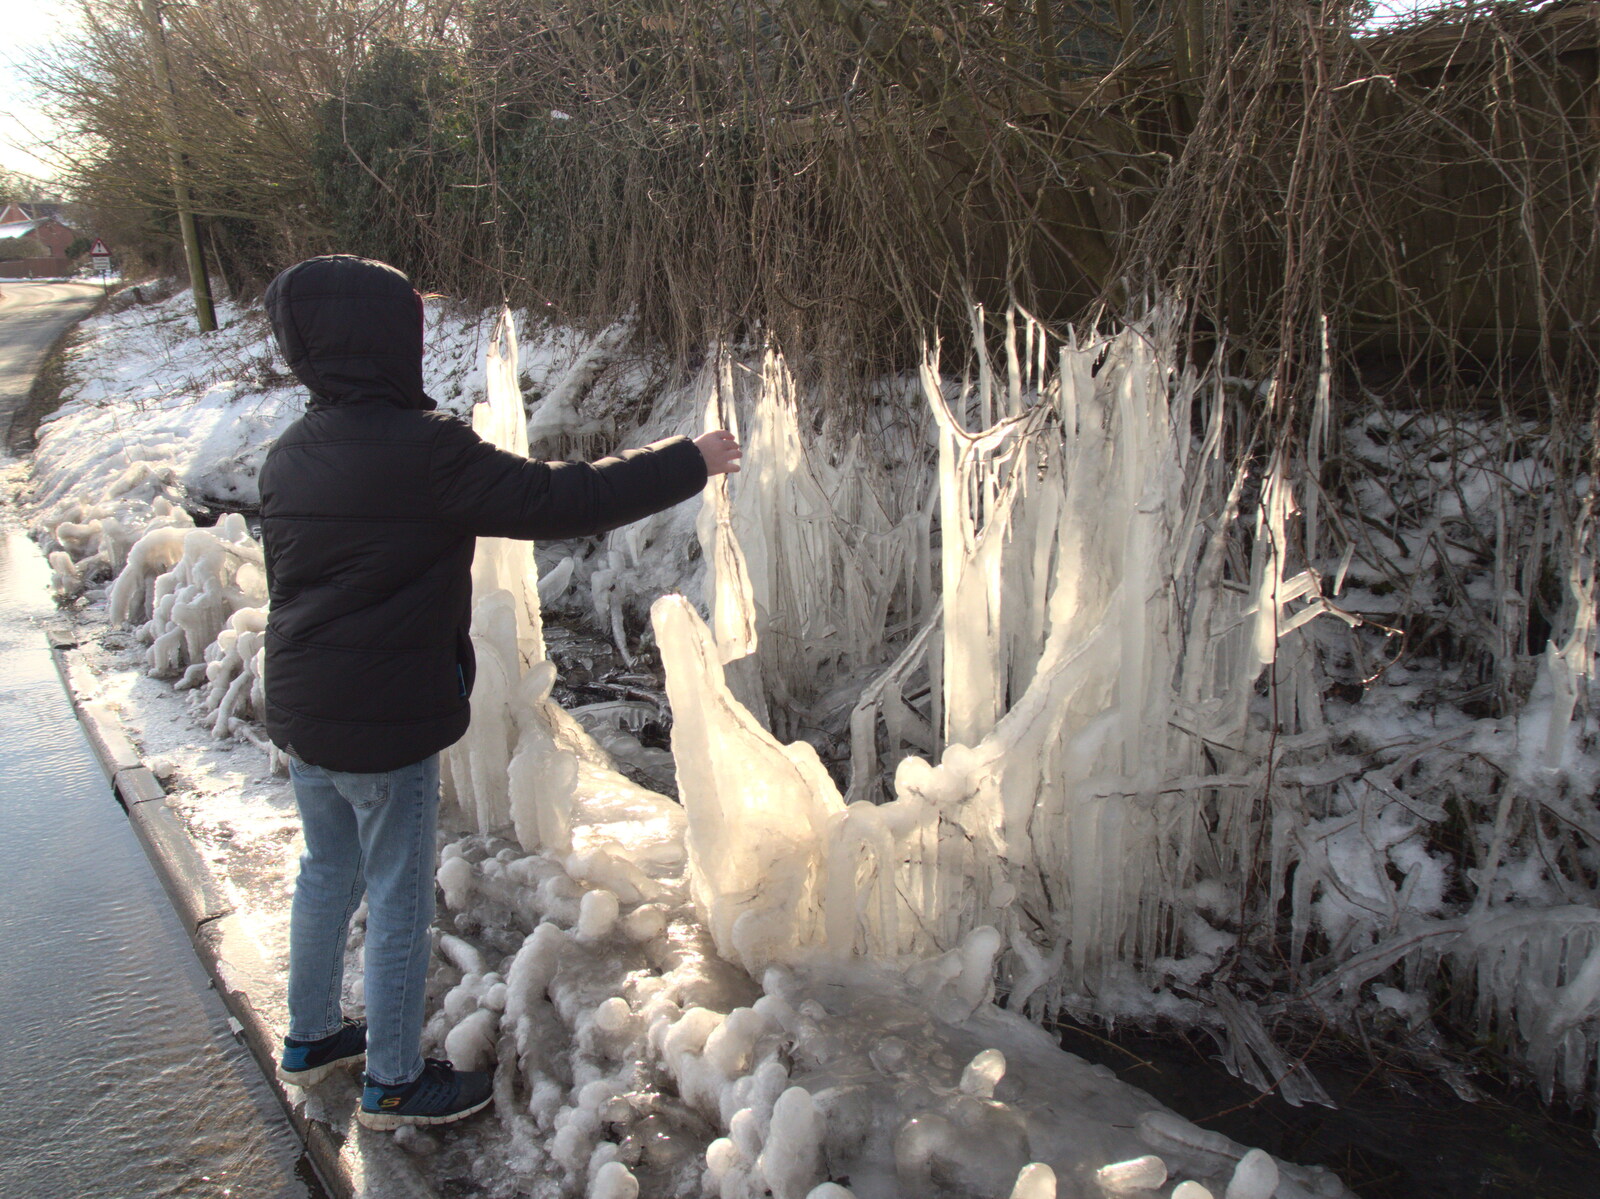 Fred pokes some of the ice from Derelict Infants School and Ice Sculptures, Diss and Palgrave, Norfolk and Suffolk - 13th February 2021